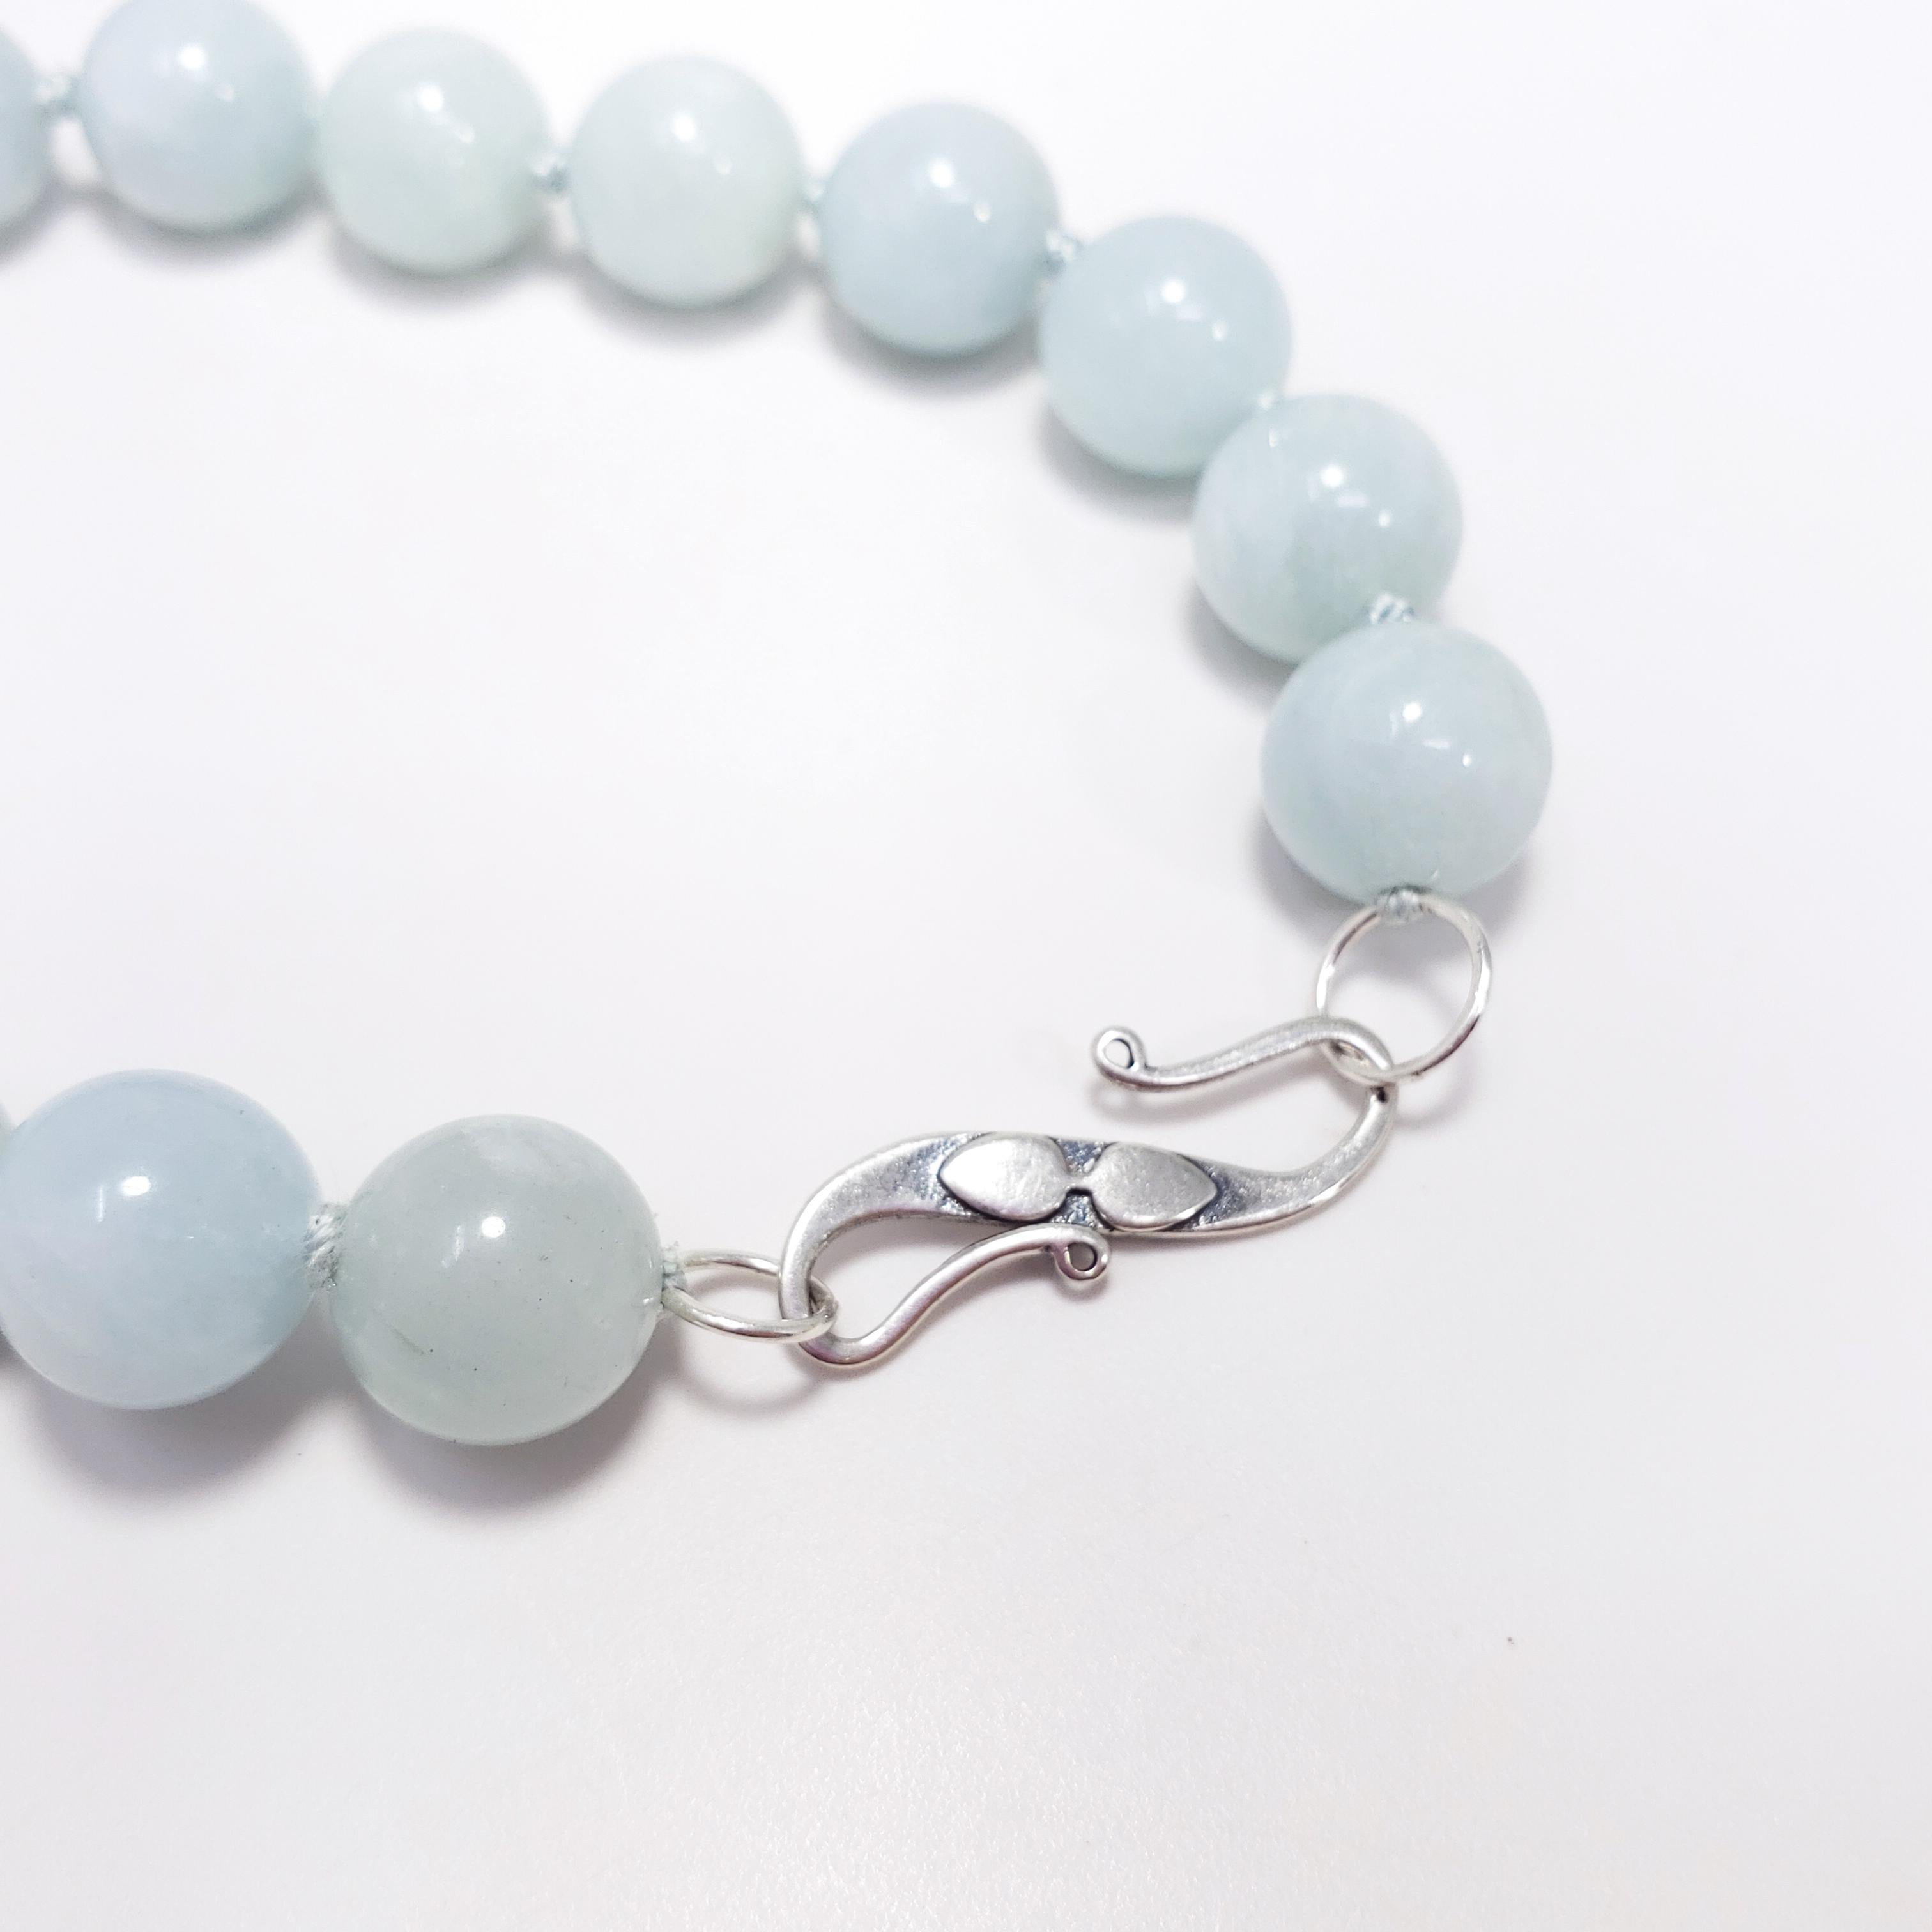 Round Cut Vintage Natural Aquamarine 10mm Bead Necklace with Sterling Silver Clasp For Sale